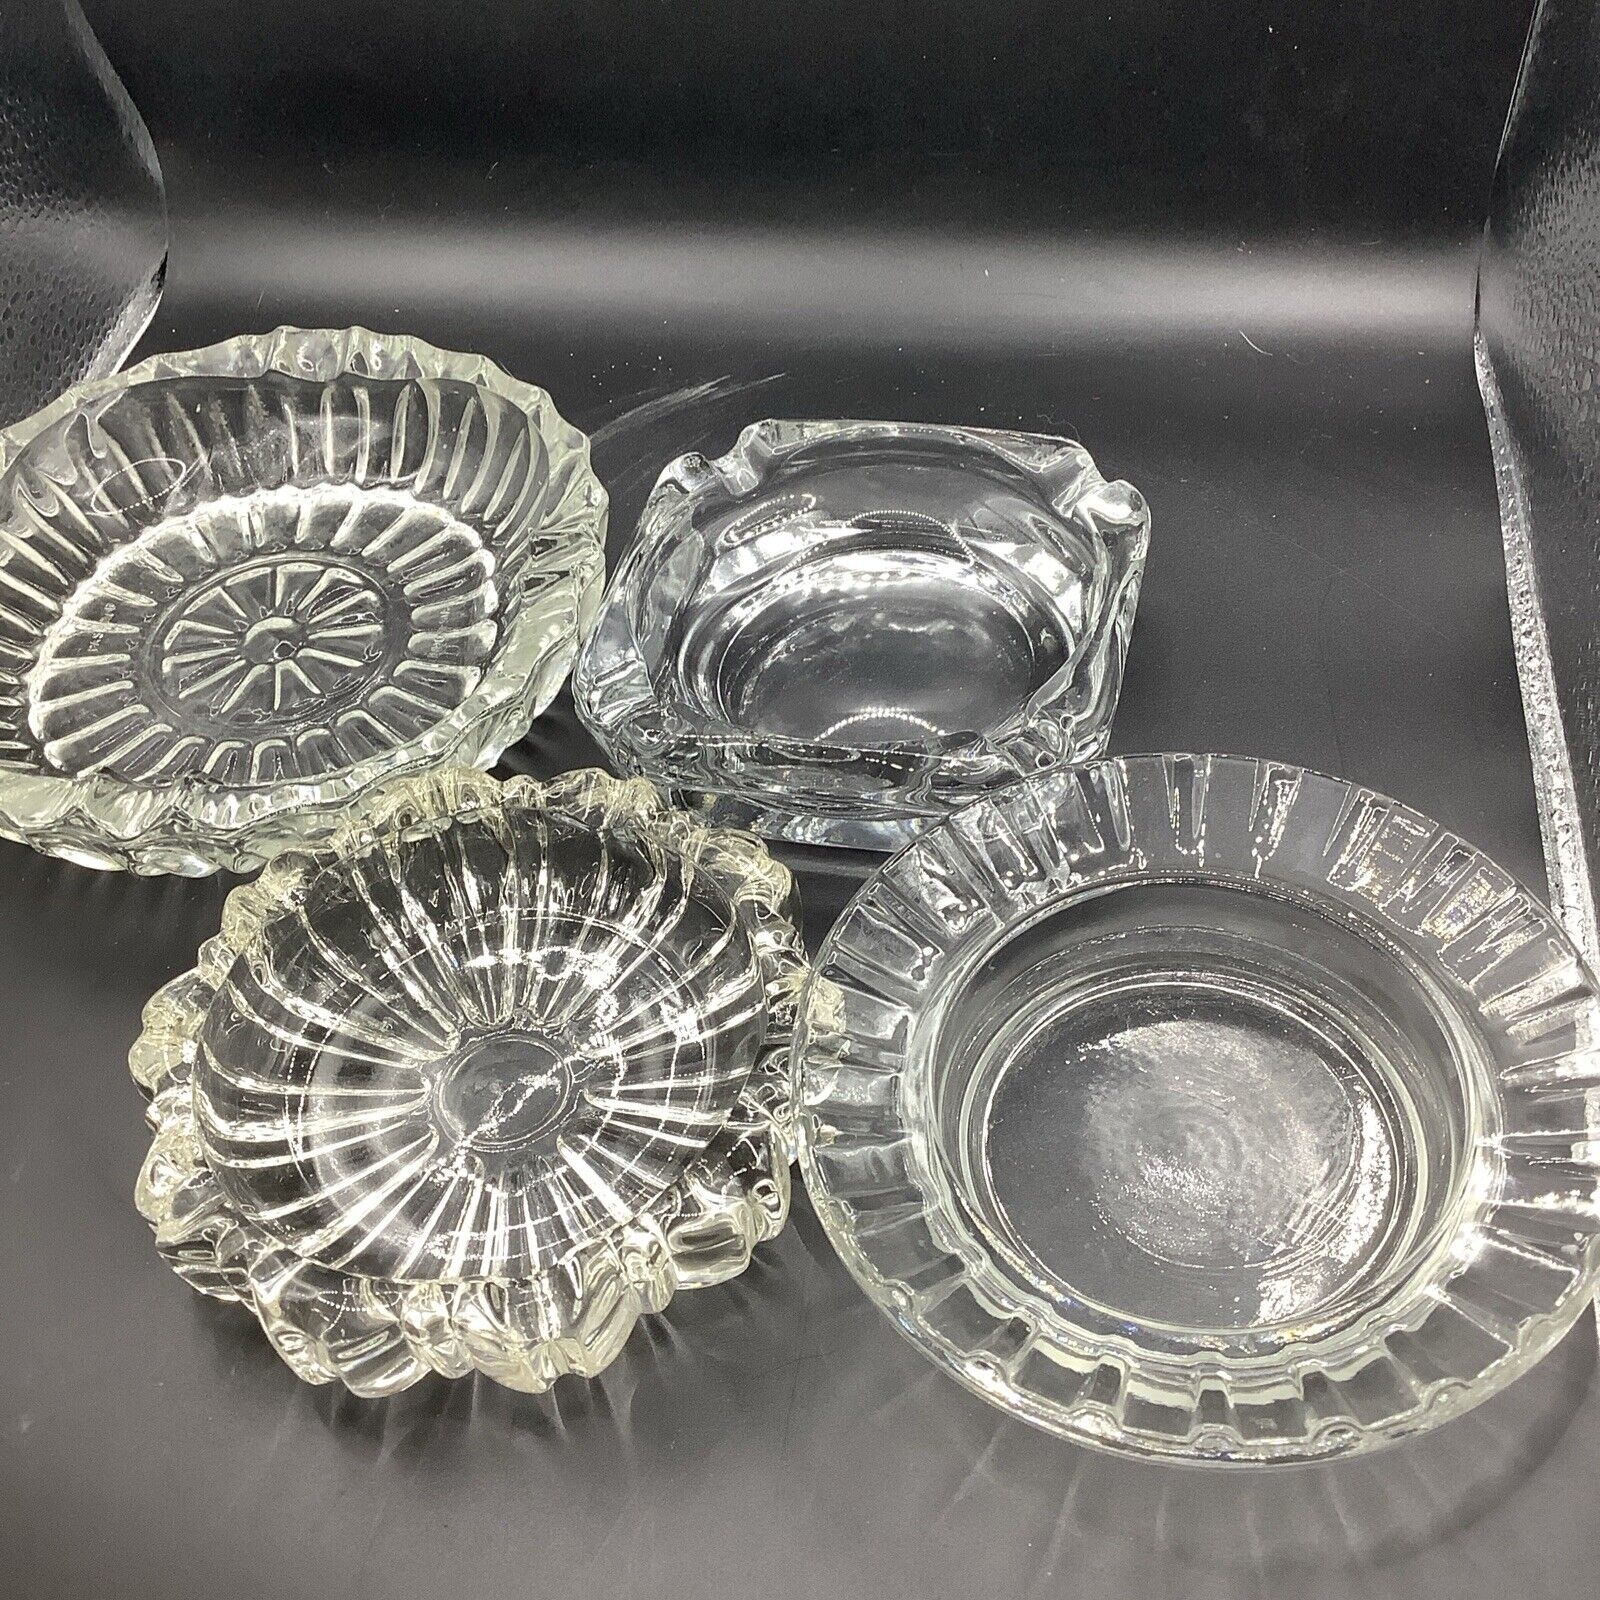 Vintage Clear Glass Ashtrays Lot Of 5